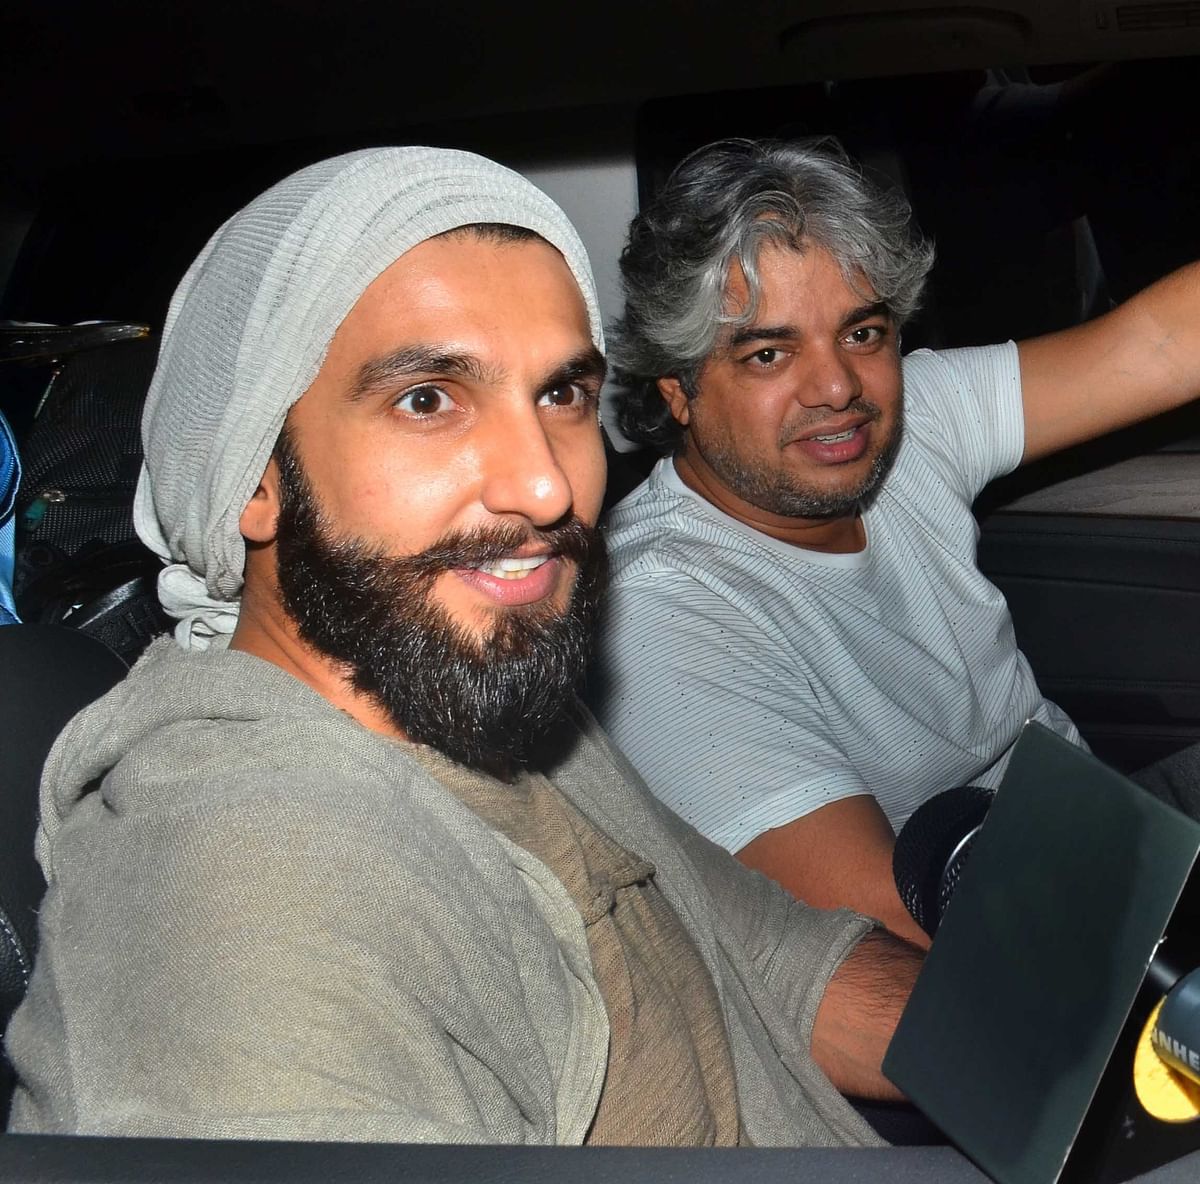 Catch pictures of Ranveer and Deepika out on a movie date.